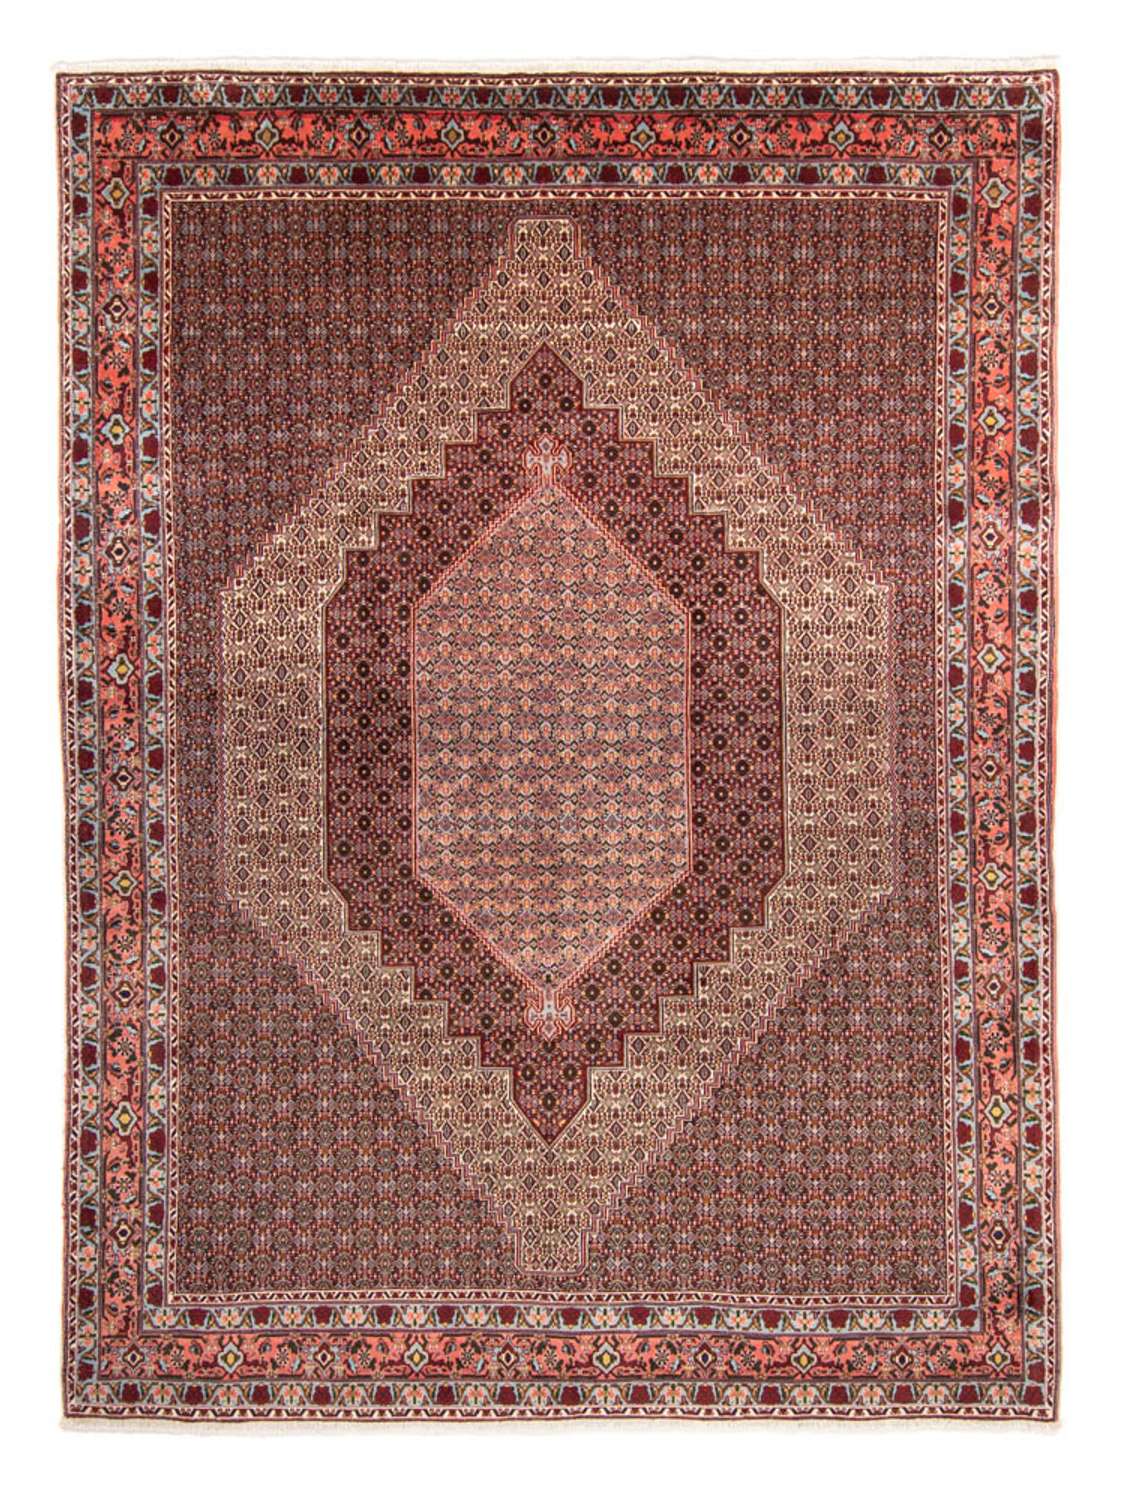 Perser Rug - Classic - 340 x 254 cm - brown